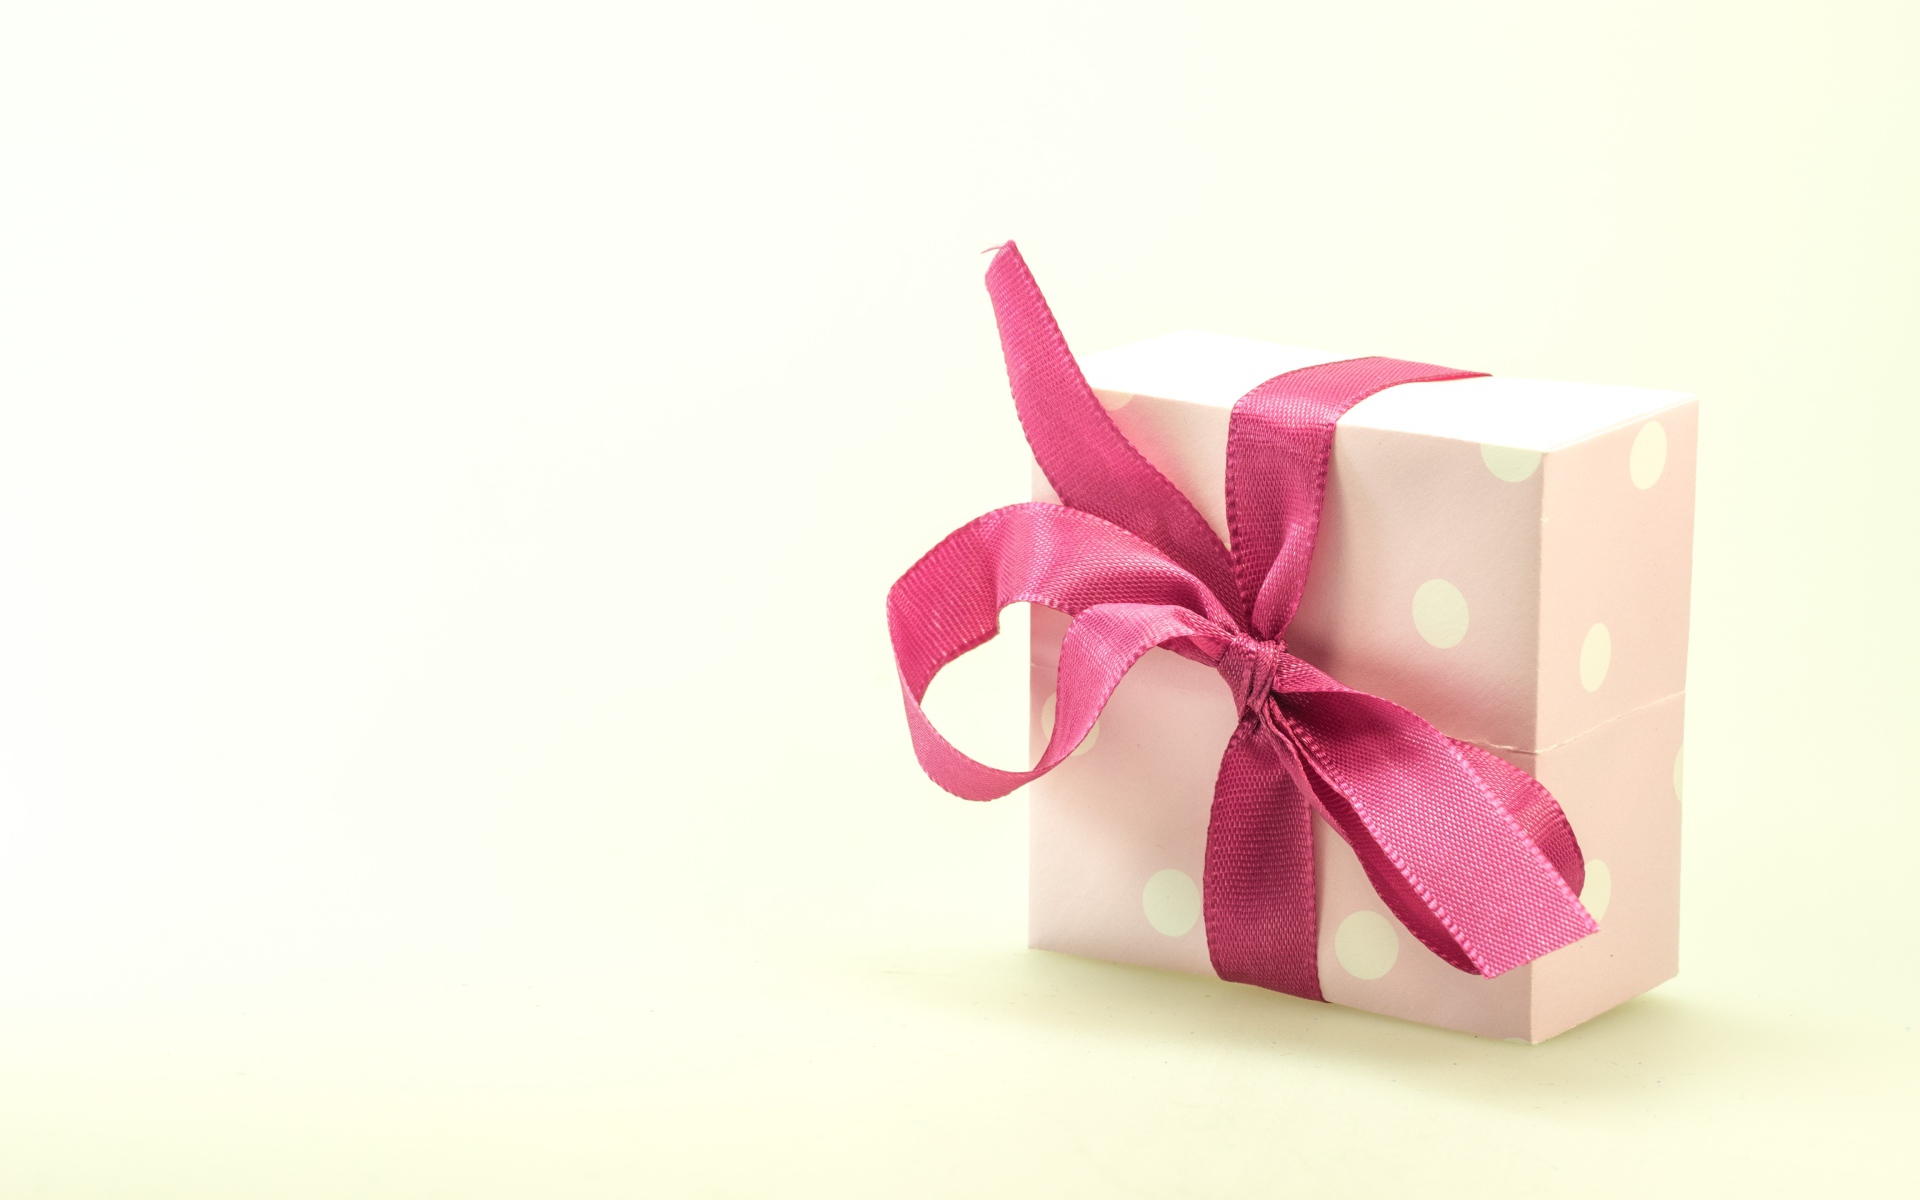 Gift box with pink bow on white background